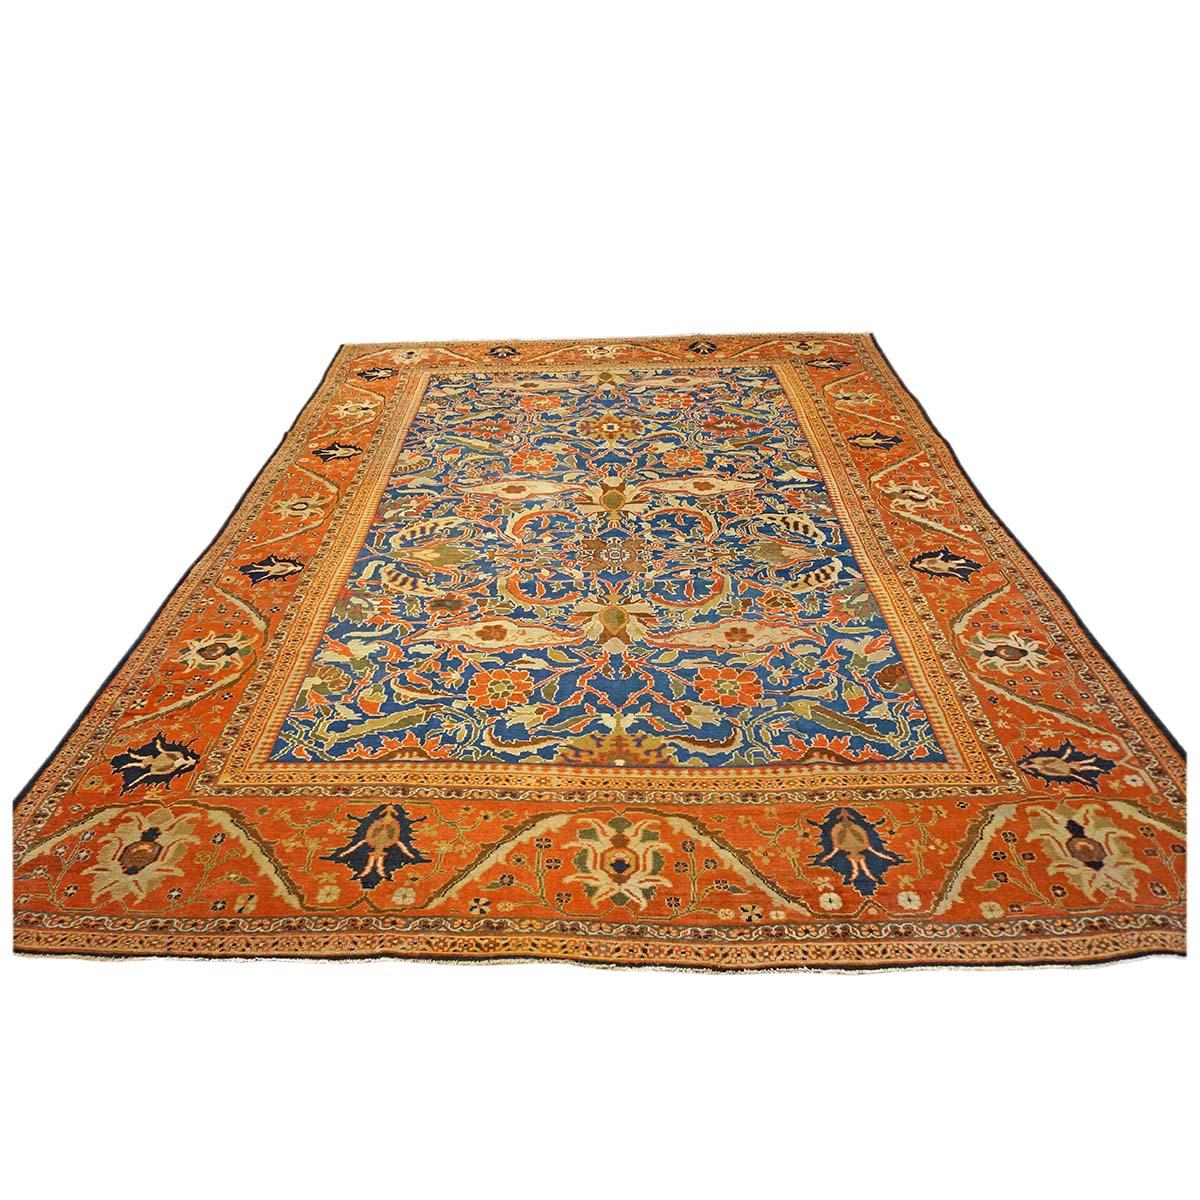 We present a beautiful Antique Persian Ziegler Sultanabad 12x15 Orange, Blue, & Ivory Handmade Area Rug #9902456. Ziegler Sultanabad carpets are classics in the world of interior design, and they continue to be used in many new and exciting ways in